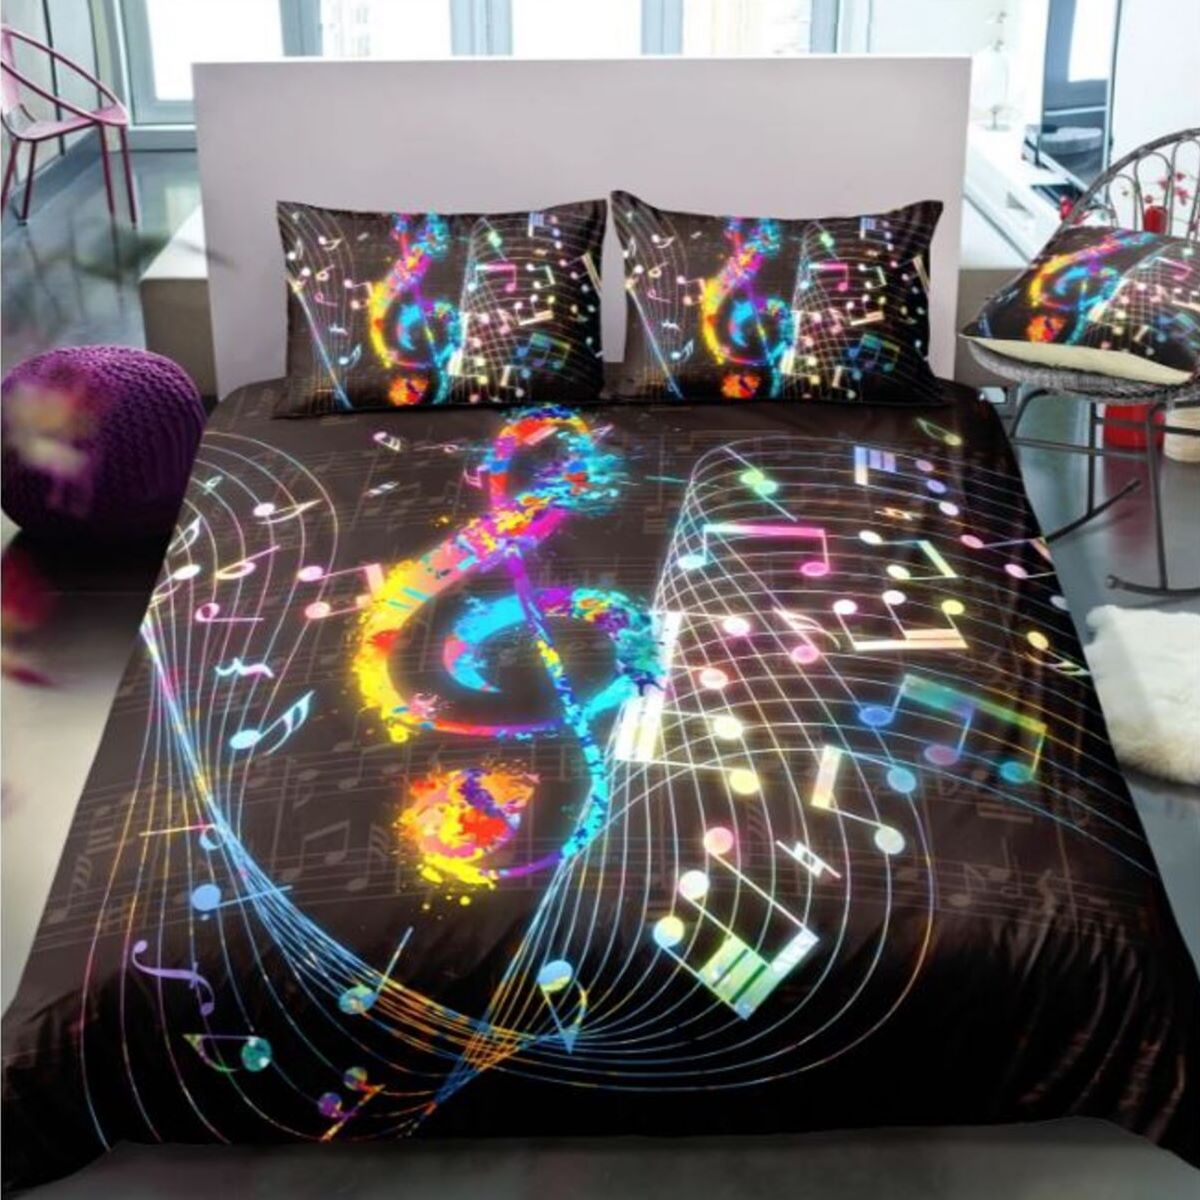 Music Is My Life Save My Soul - Bedding Cover - Owls Matrix LTD